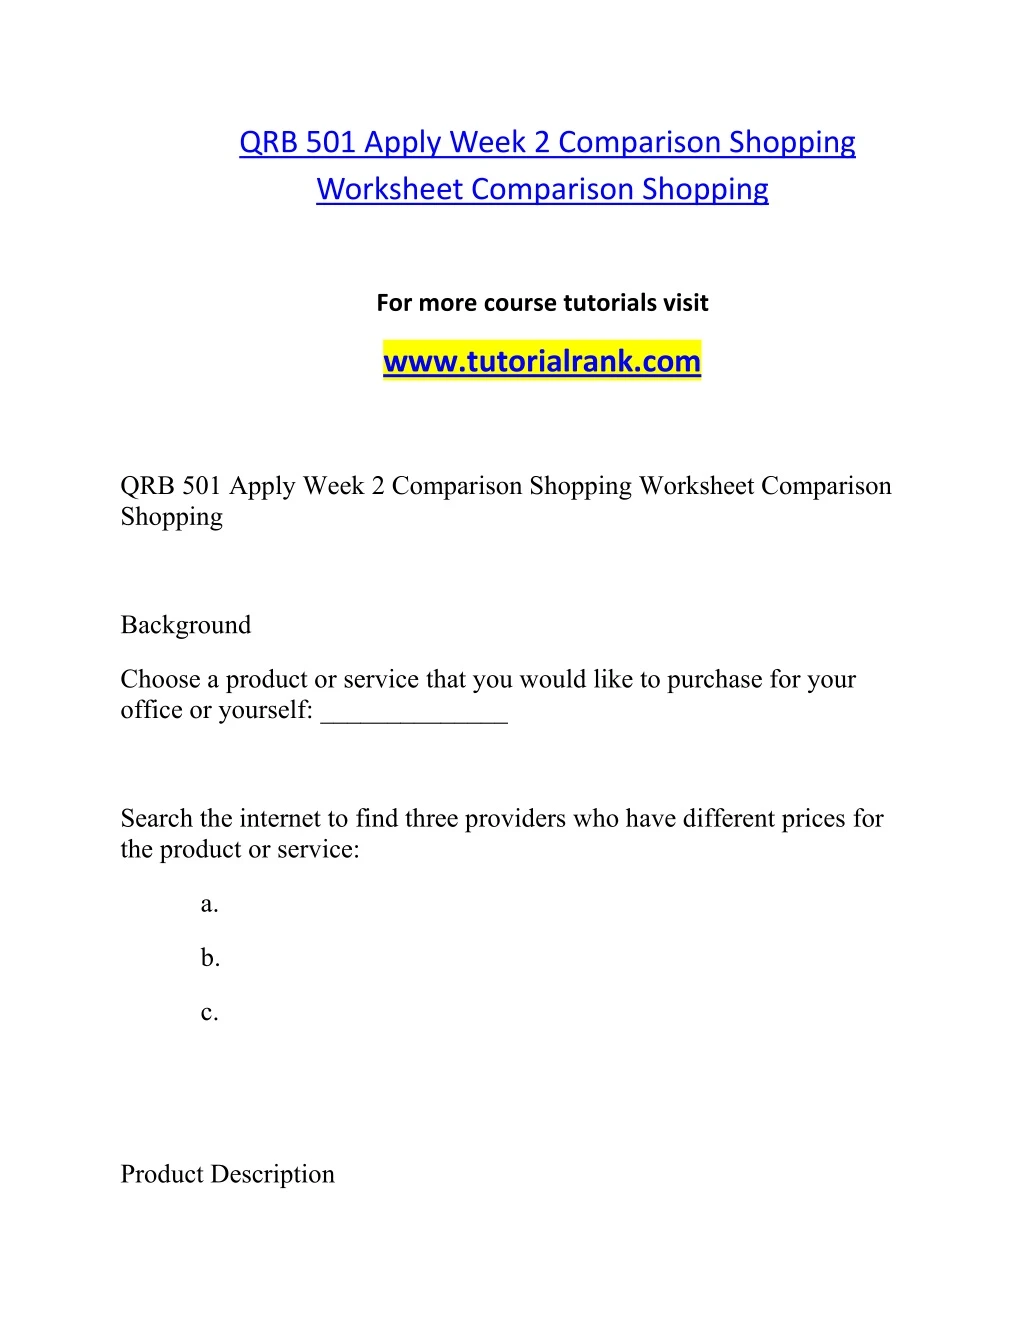 qrb 501 apply week 2 comparison shopping